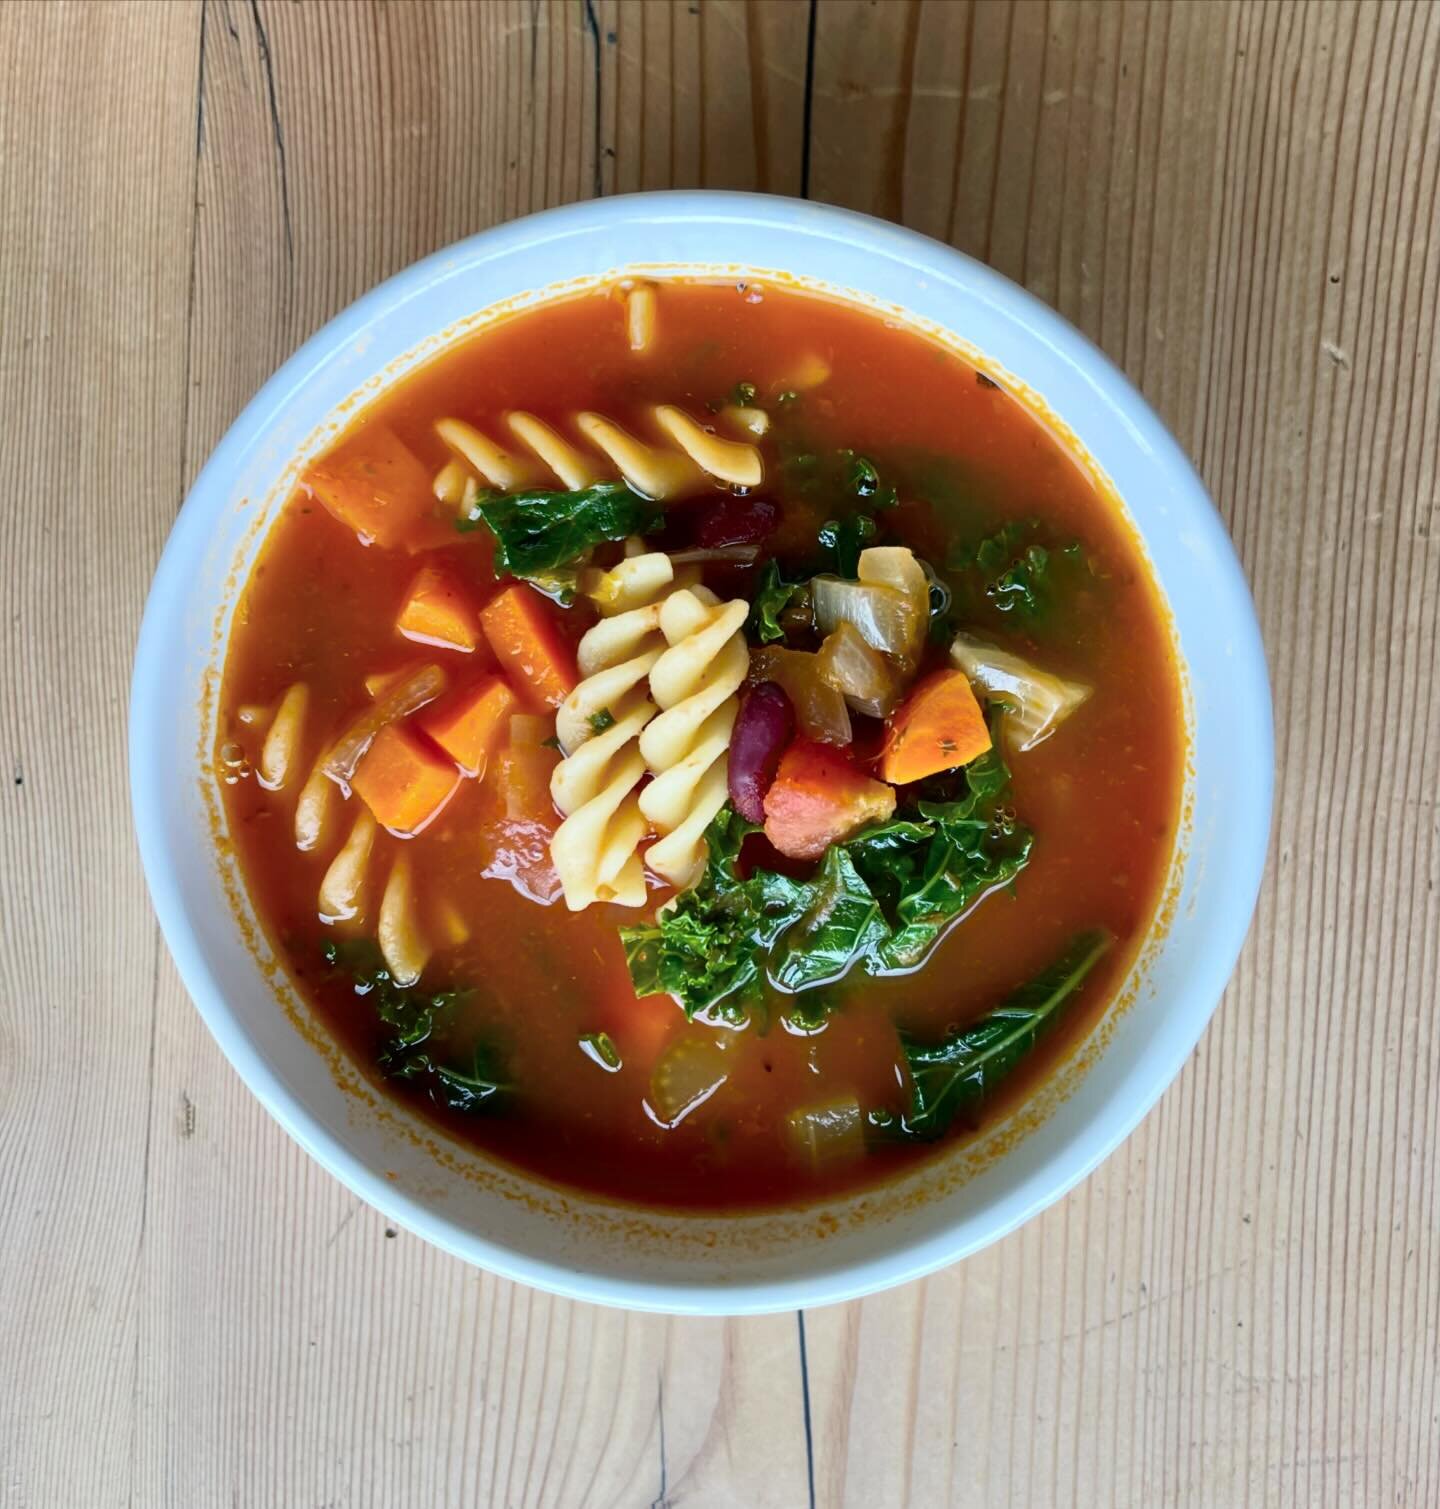 New soup: Minestrone made with GF pasta!  Always vegan &amp; GF. 

#soup #soupseason #minestrone #minestronesoup #glutenfree #vegan #glutenfreeandvegan #glutenfreesoup #vegansoup #petitcafeoak